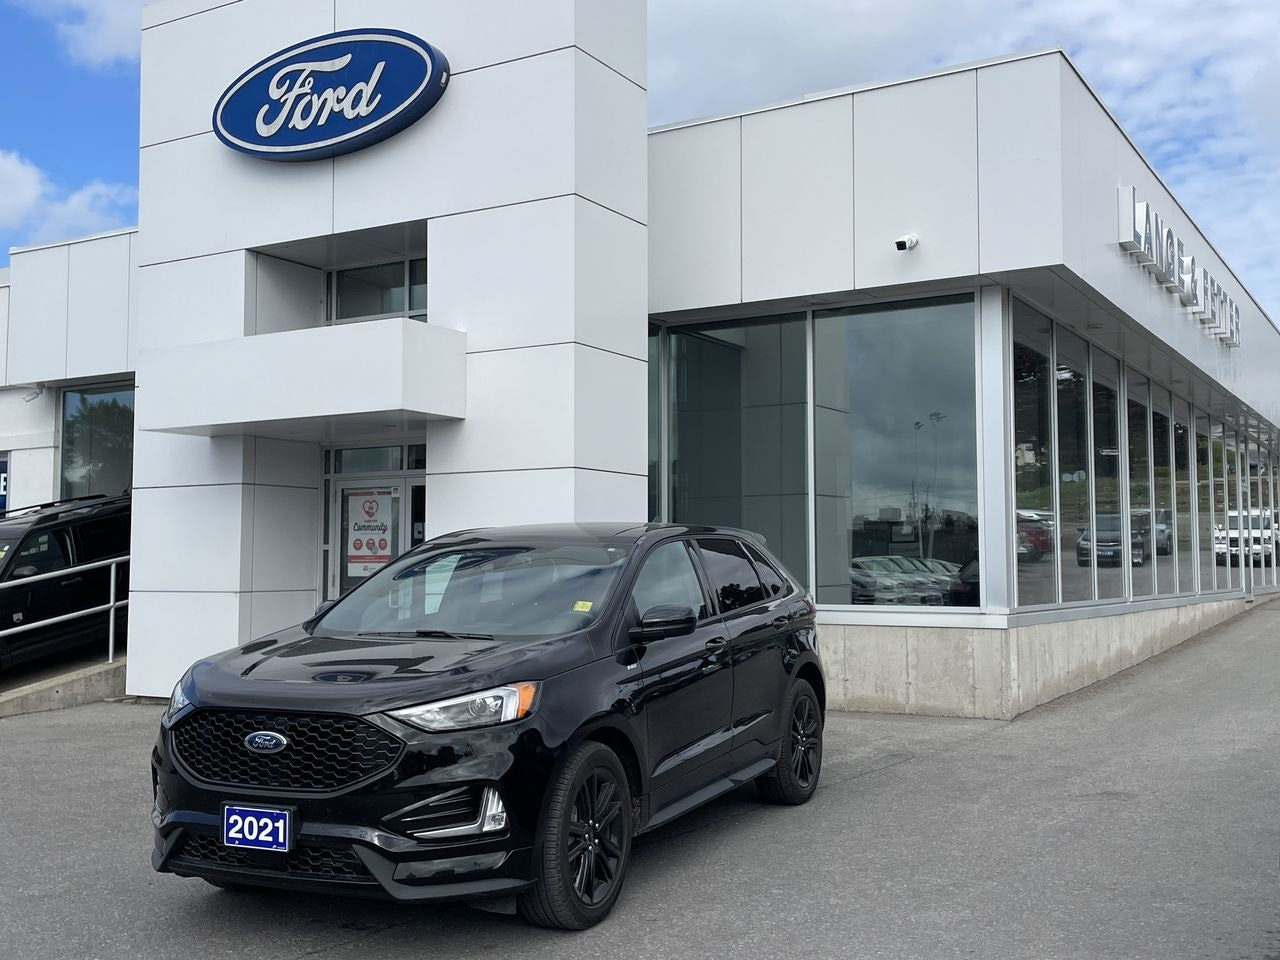 2021 Ford Edge - 21428A Full Image 1